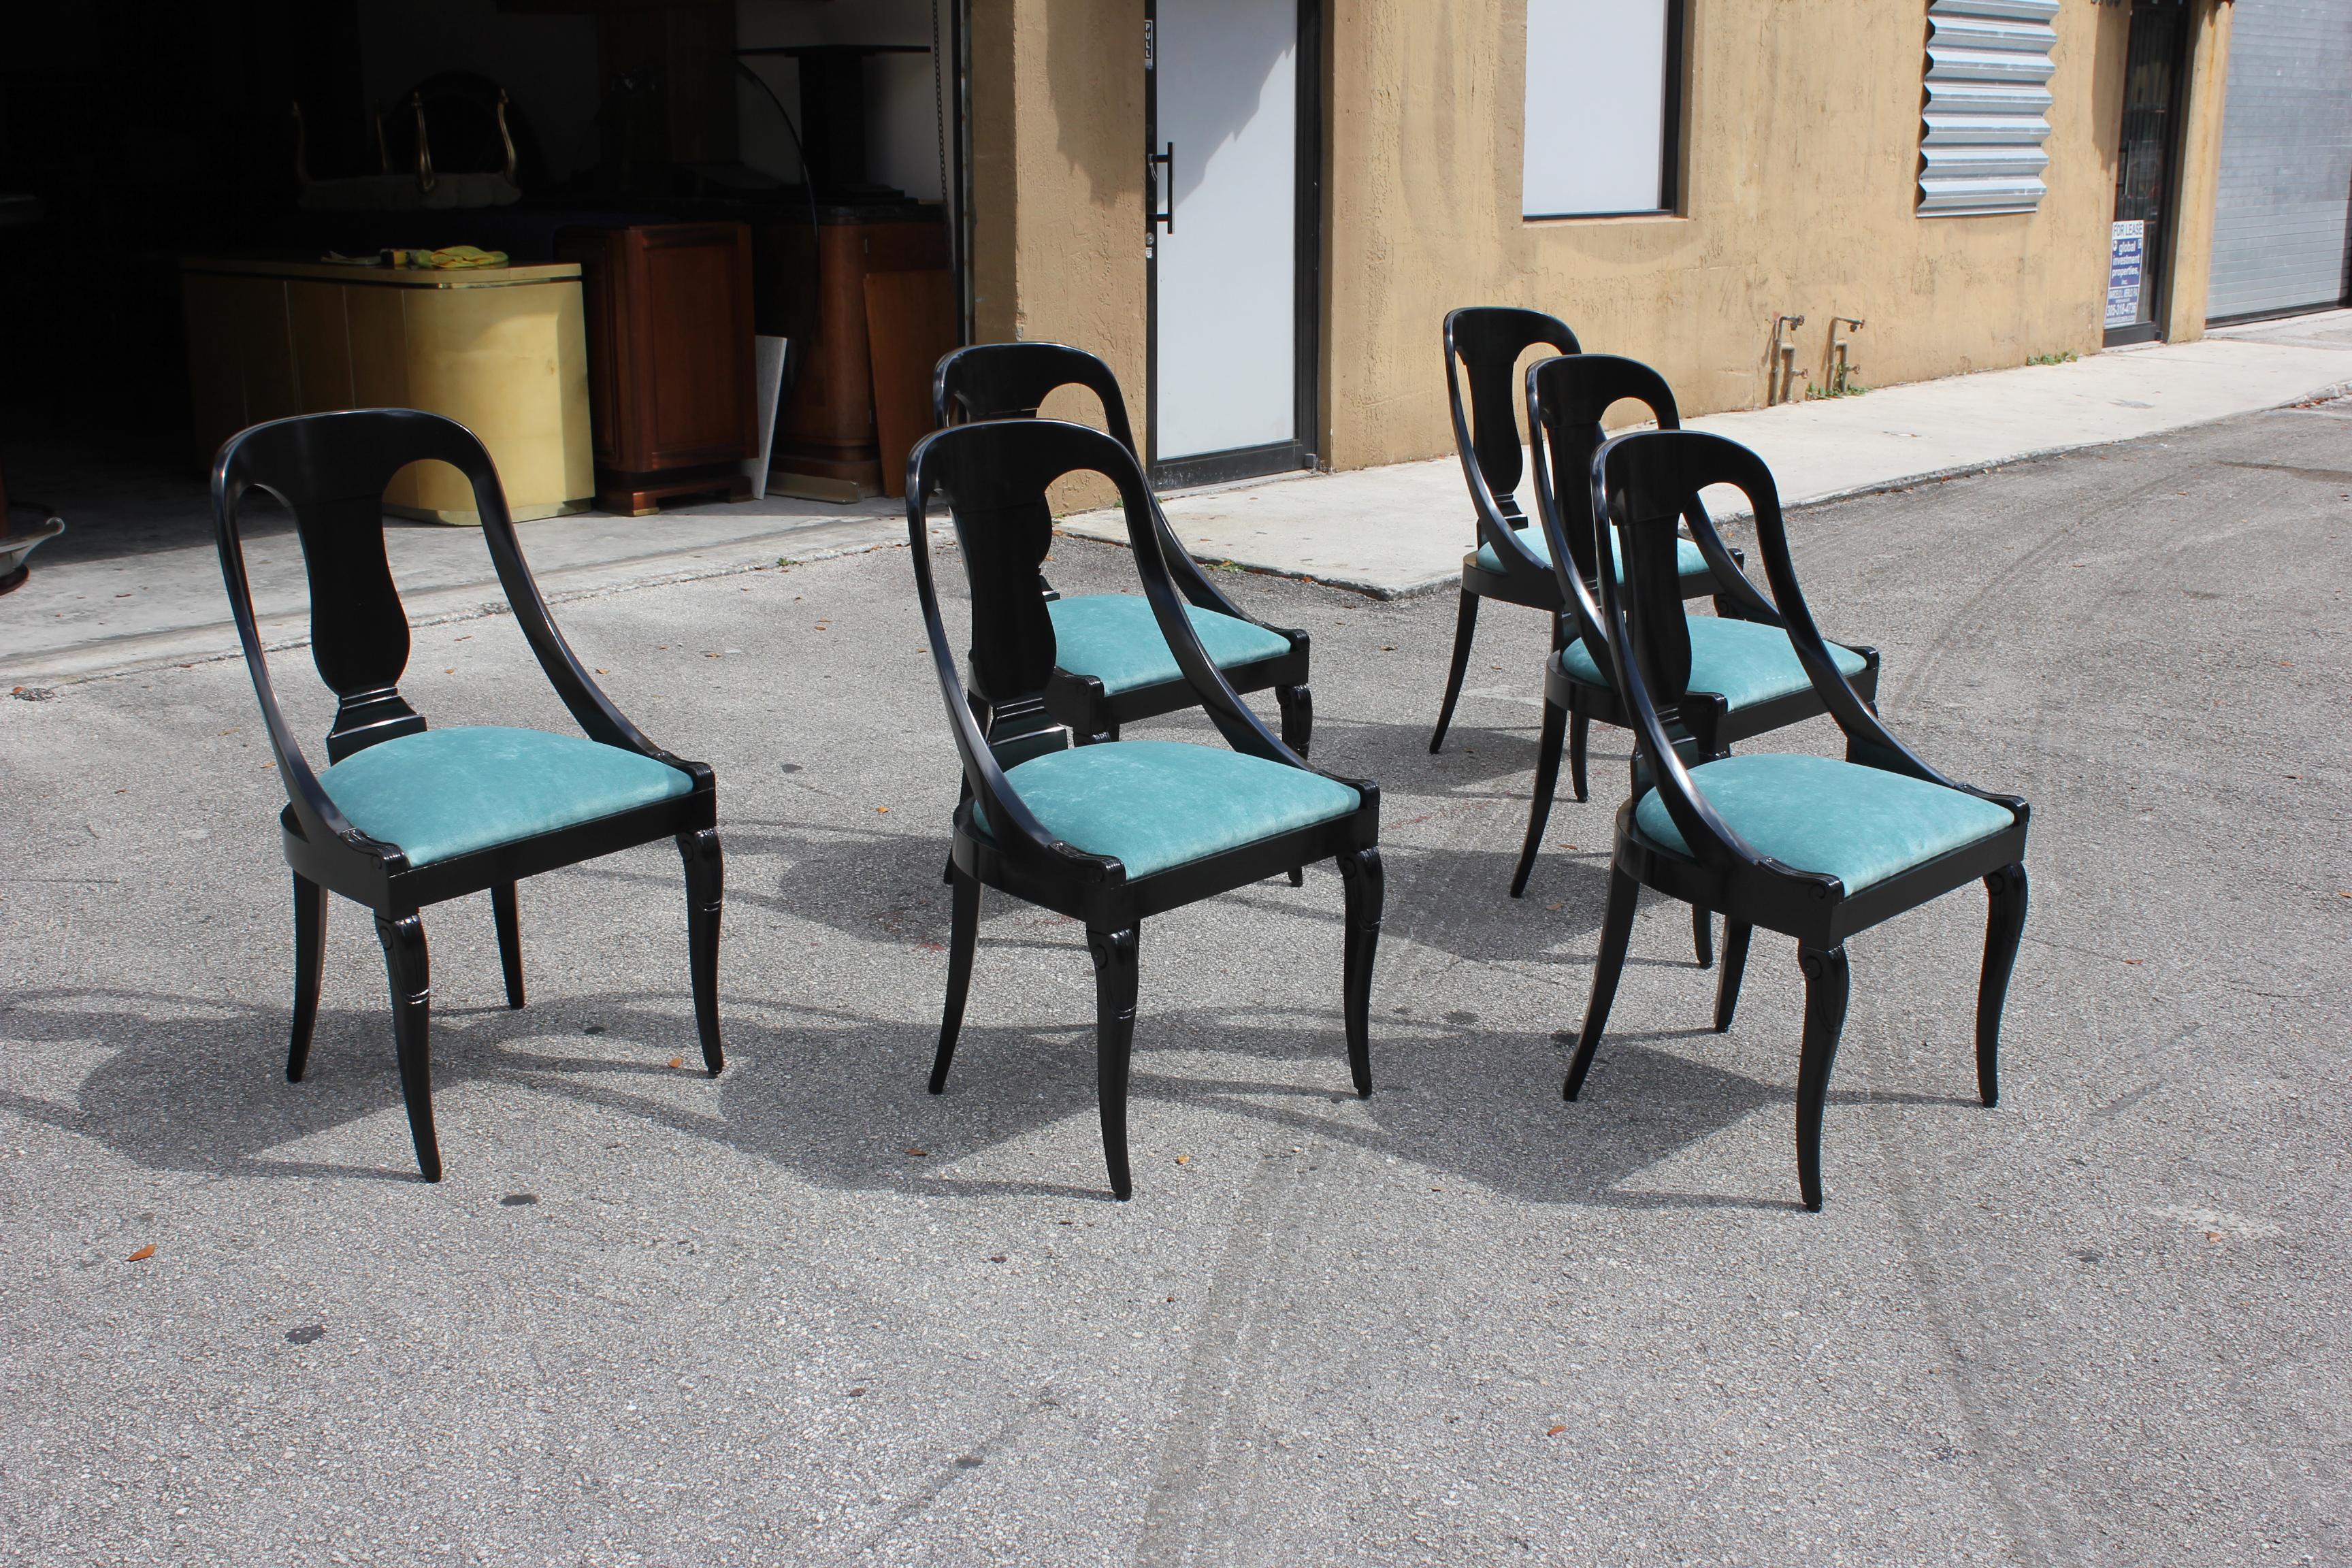 Set of 6 French Art Deco “Gondola” dining chairs, circa 1940s, made of mahogany, the mahogany wood has been ebonized and finished with a French polished high luster, The seats of 6 dining chairs have been newly upholstered in aqua blue, the chairs